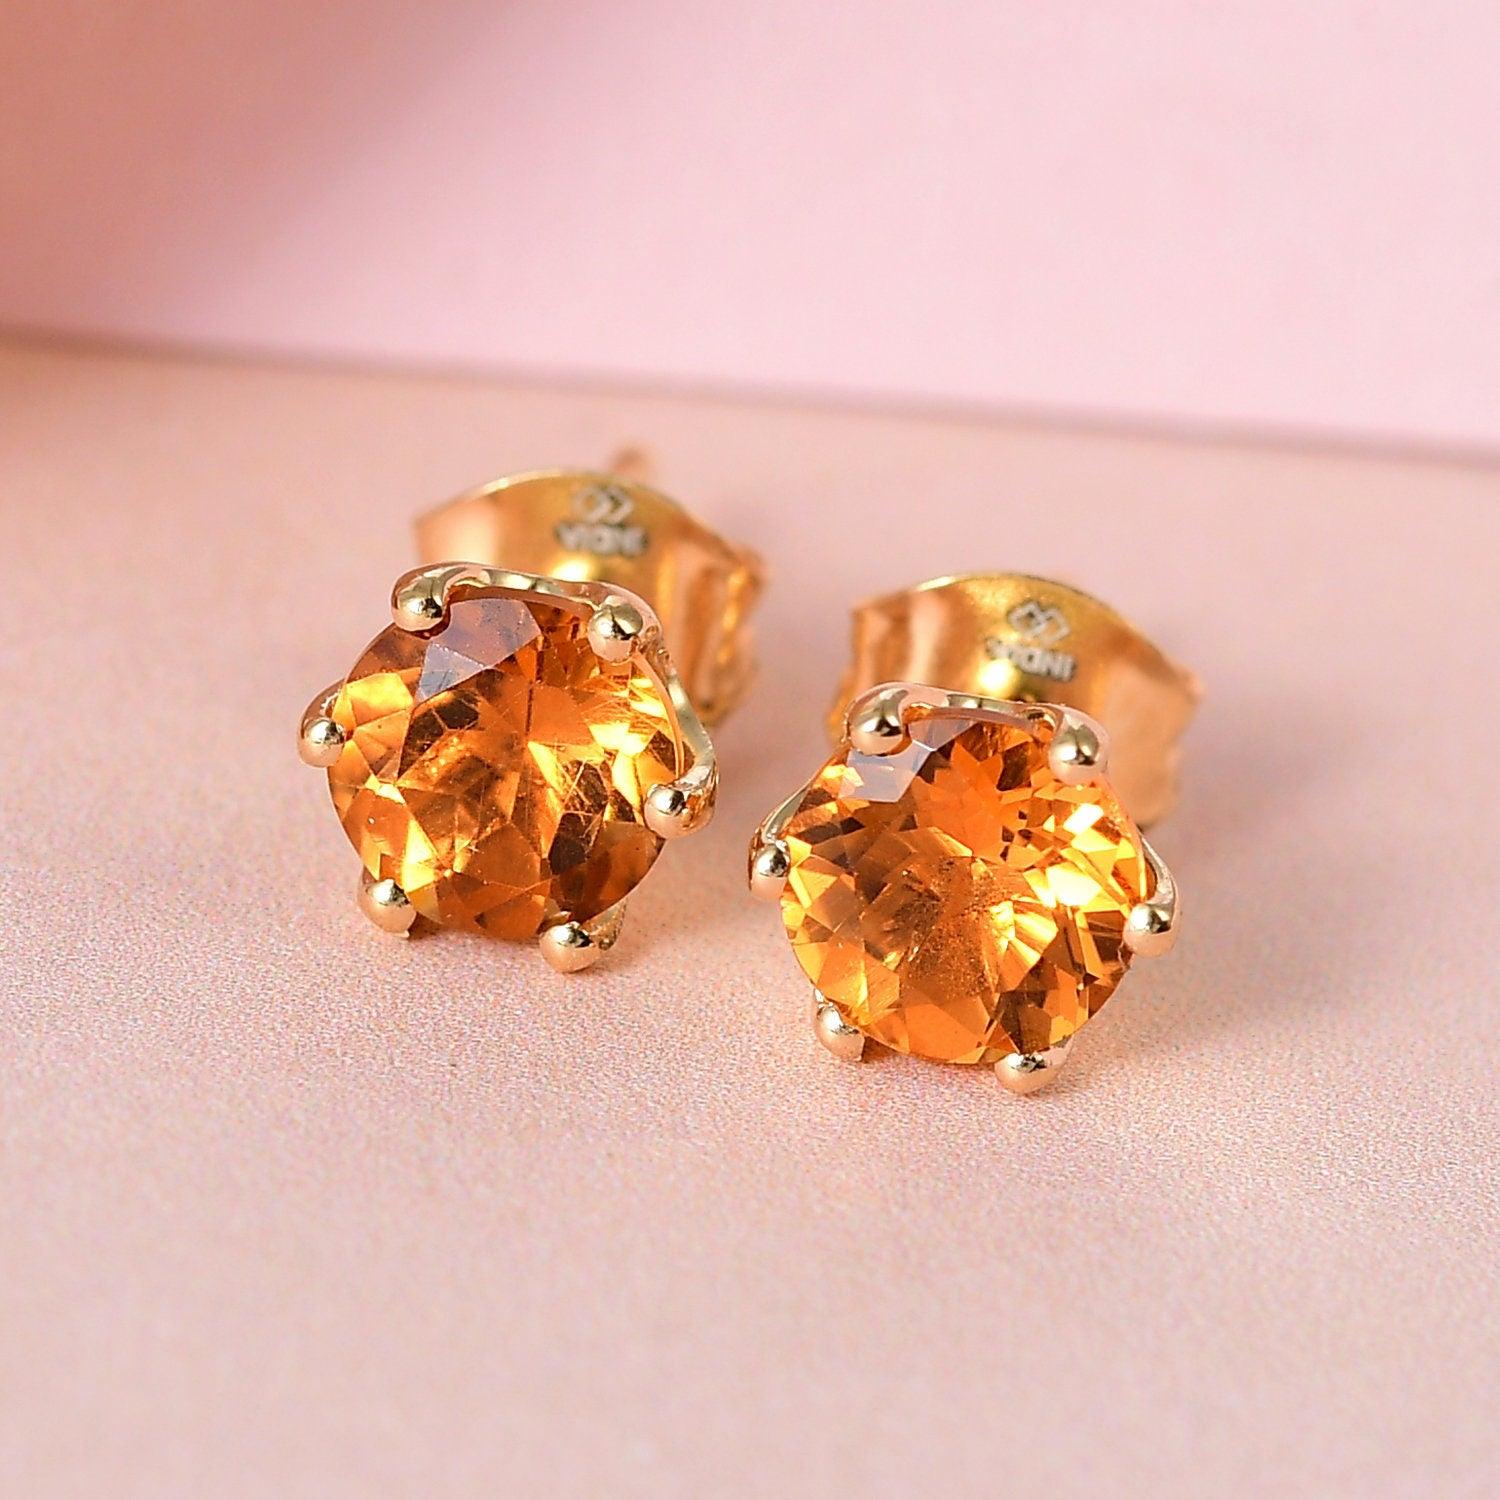 AAA Citrine Round Studs earrings, 925 Sterling Silver Solitaire Stud , Yellow Gold, Six Prong Studs by Inspiring Jewellery - Inspiring Jewellery